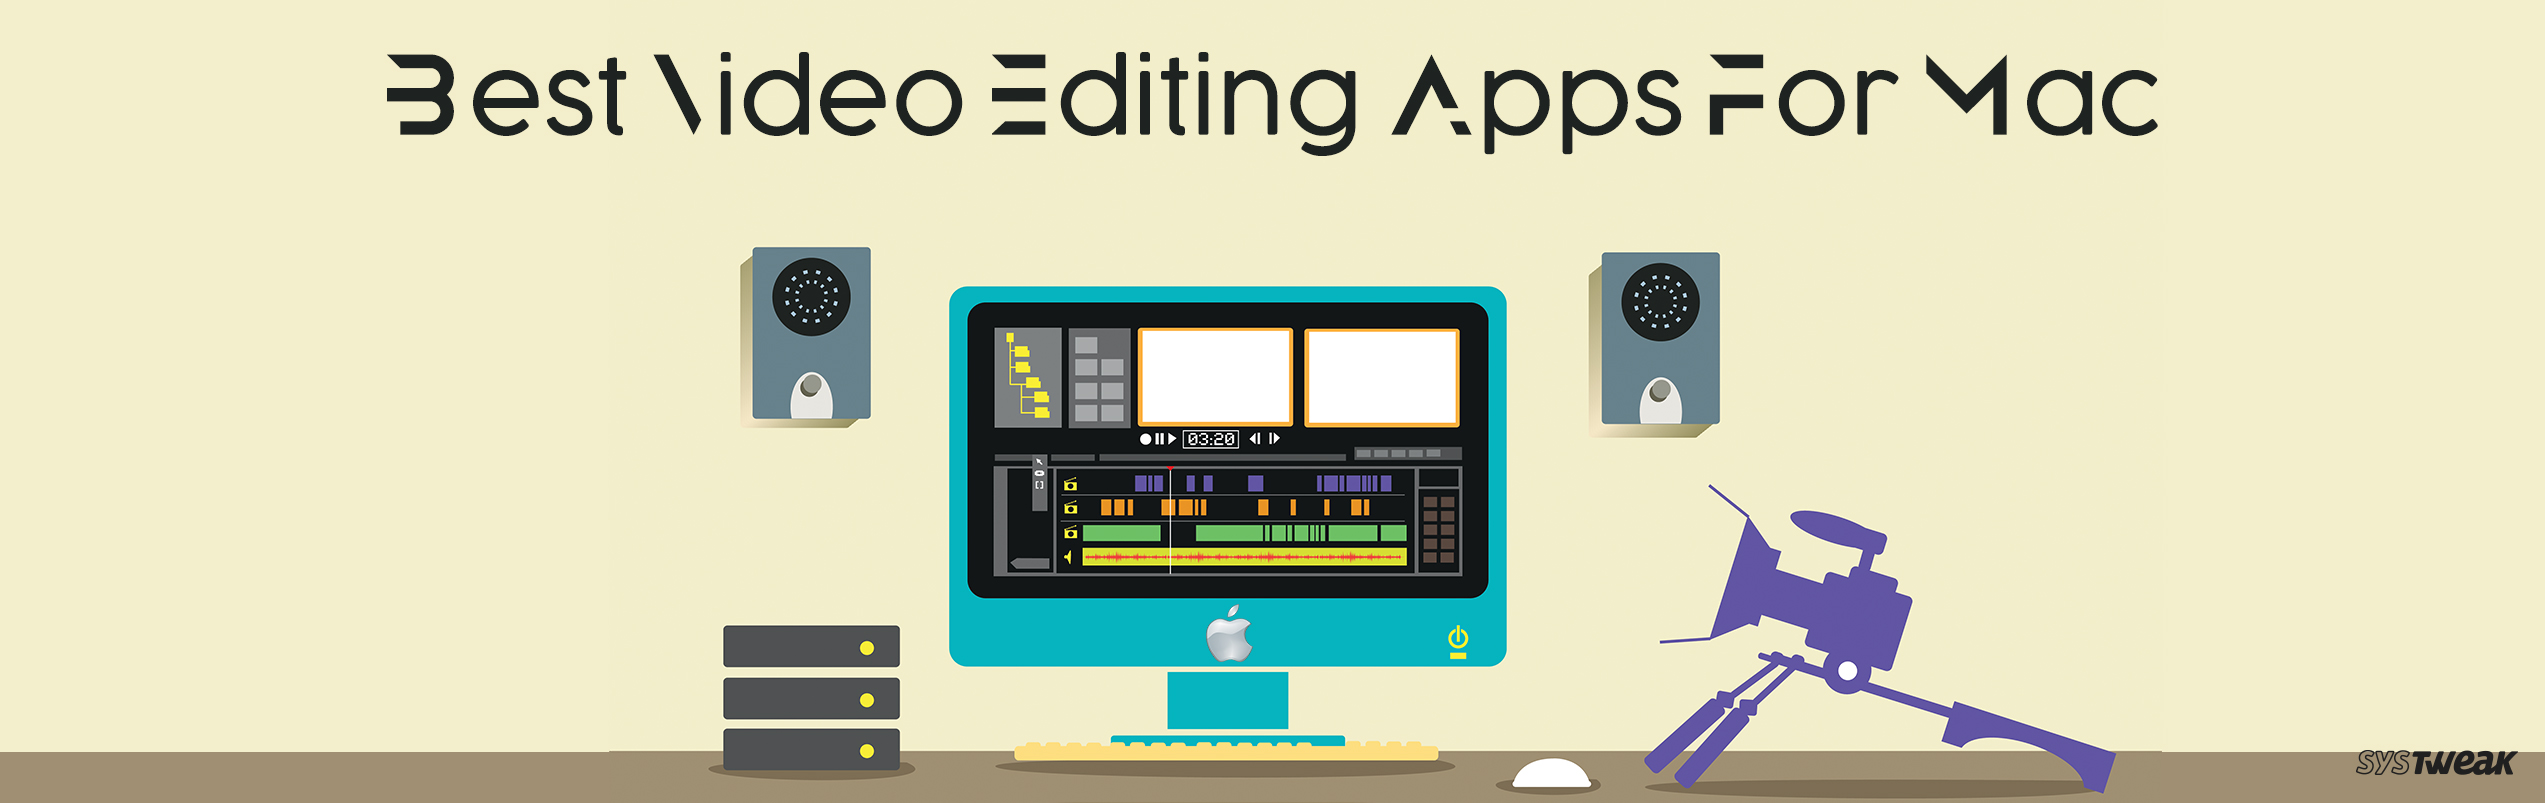 Best Video Editor For Mac 2017